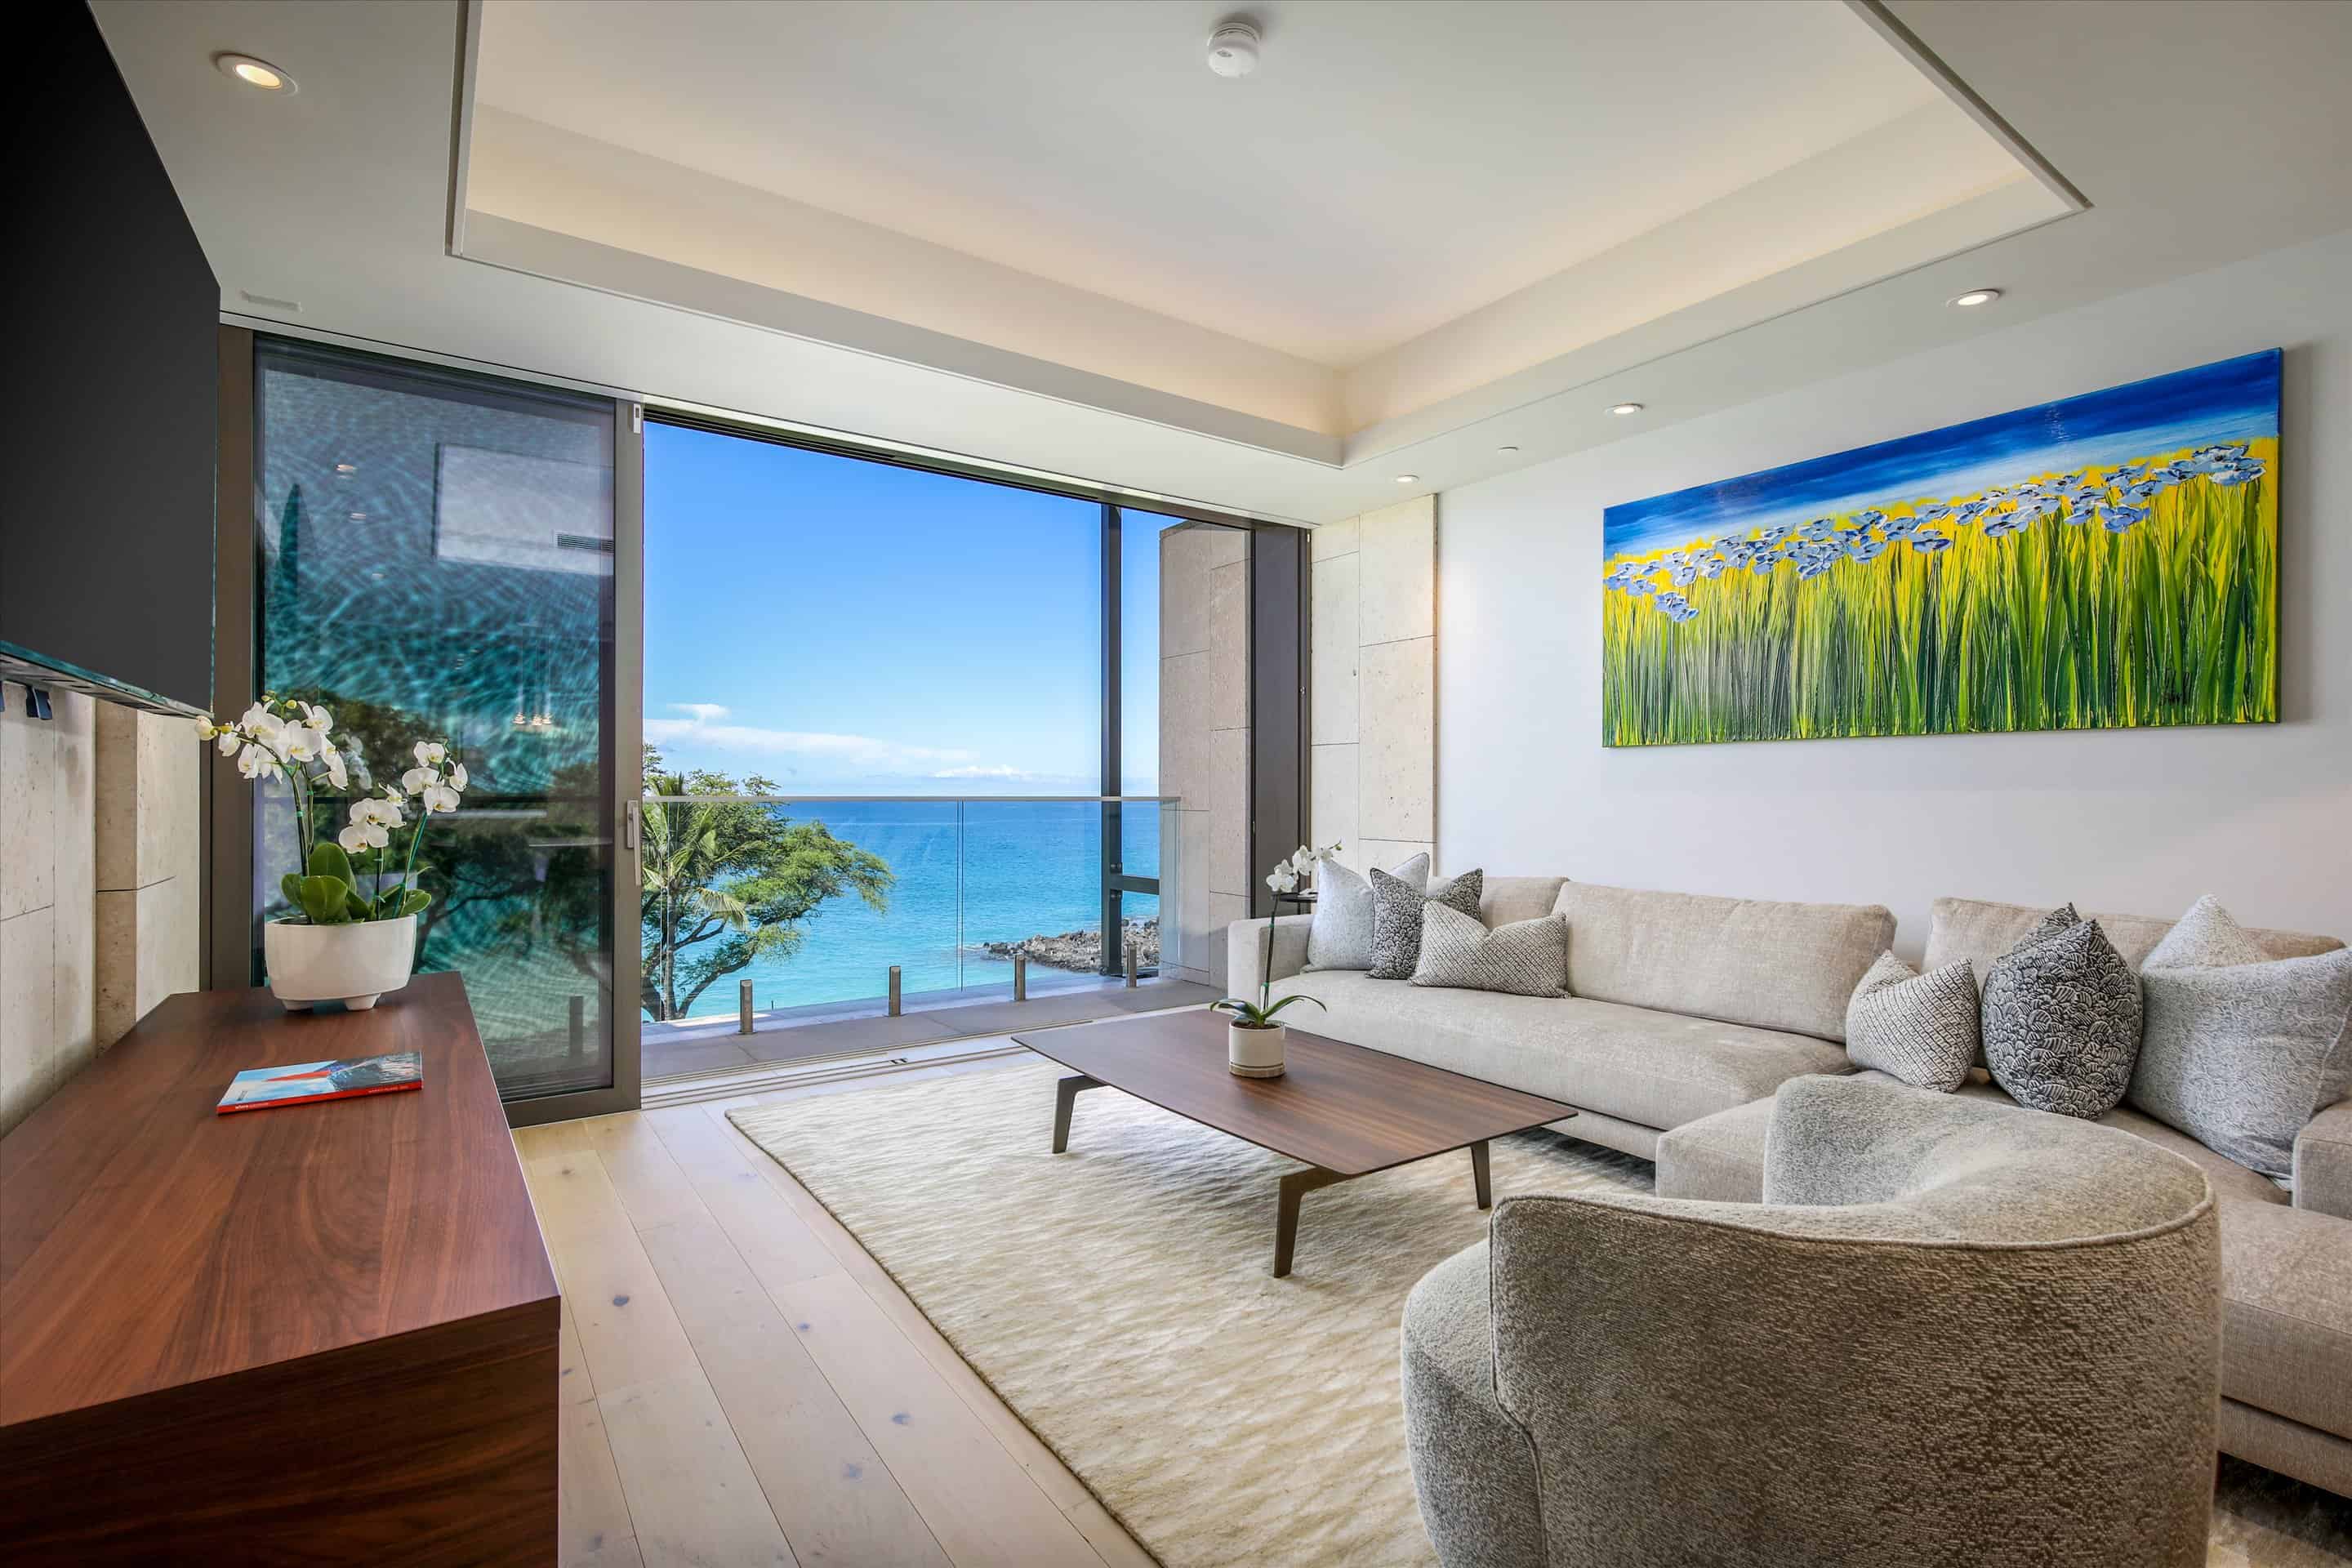 Property Image 2 - Sweeping Ocean Views from Quiet Four Bedroom Home